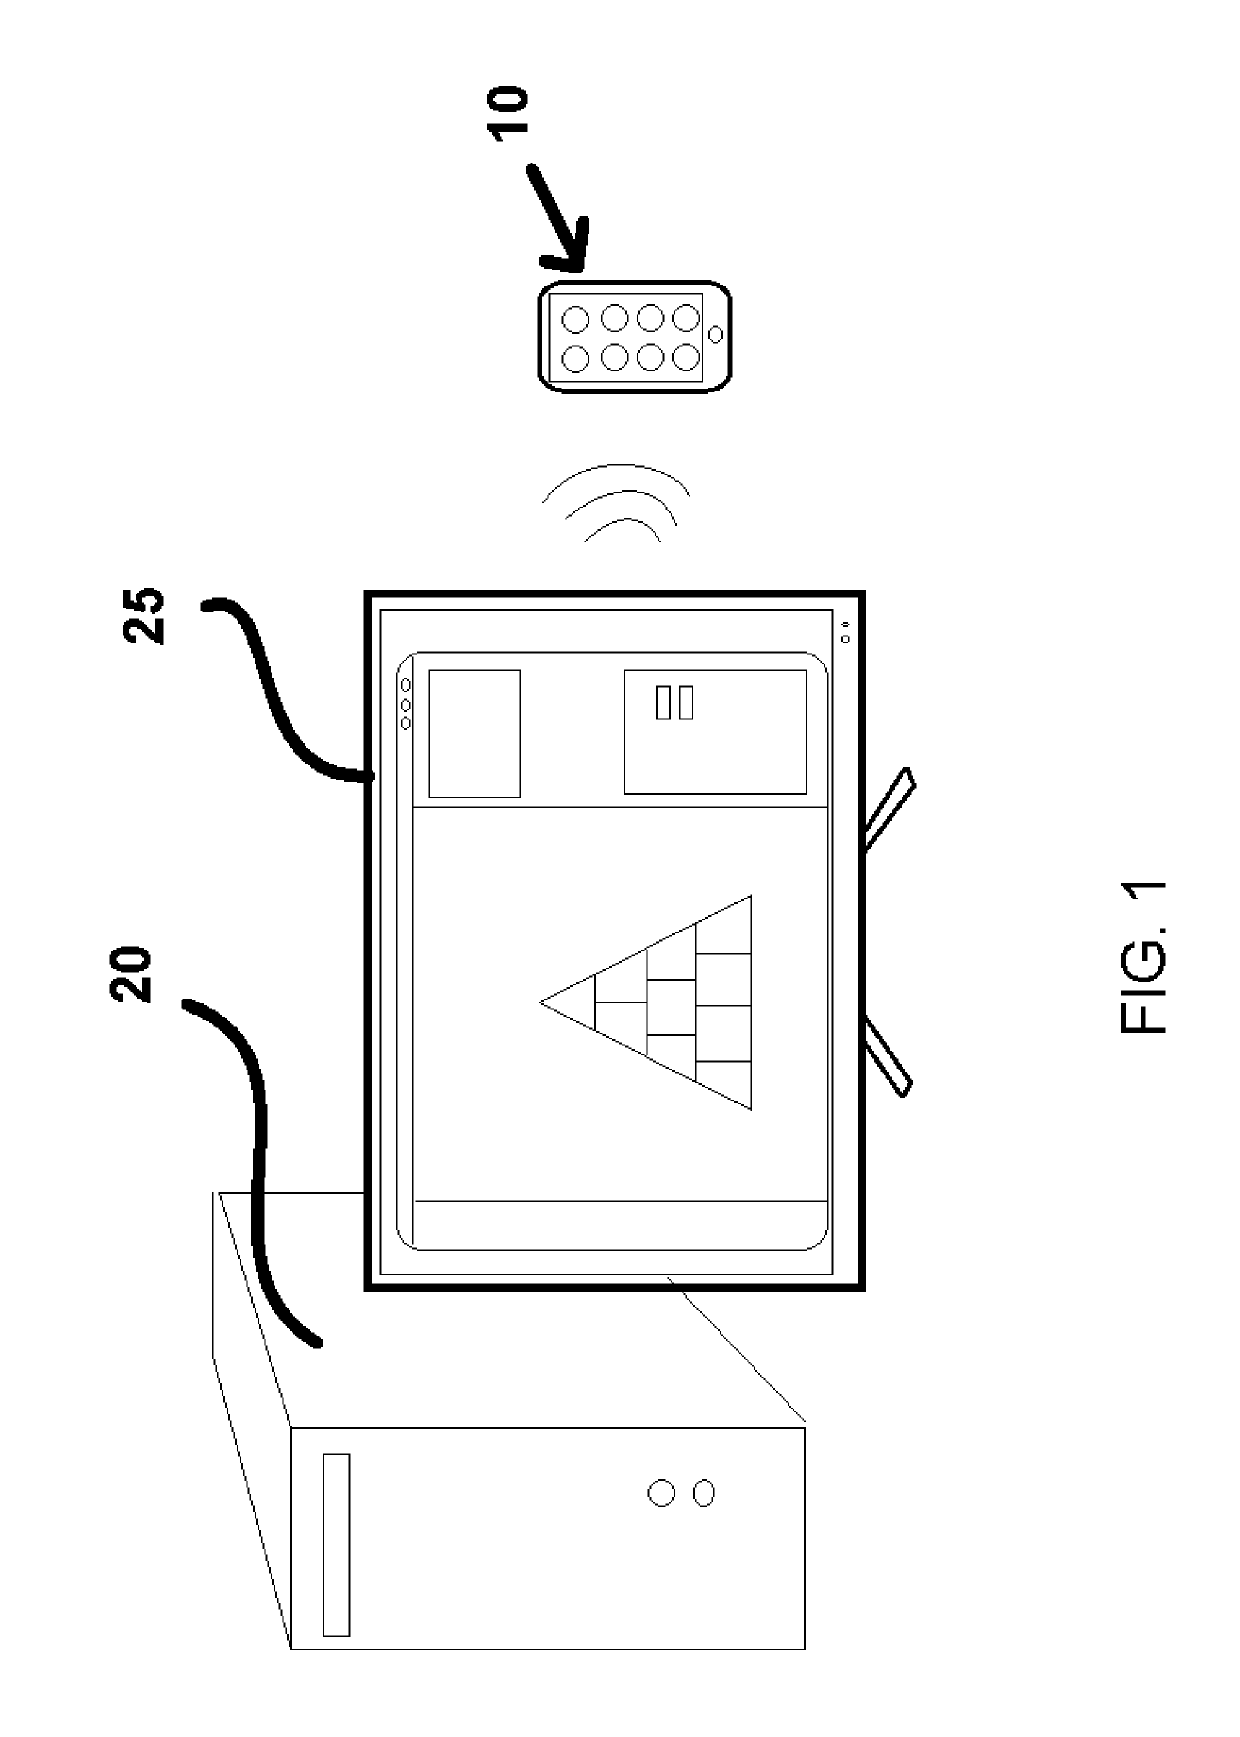 System for Augmenting a Computer Display via a Mobile Device Display